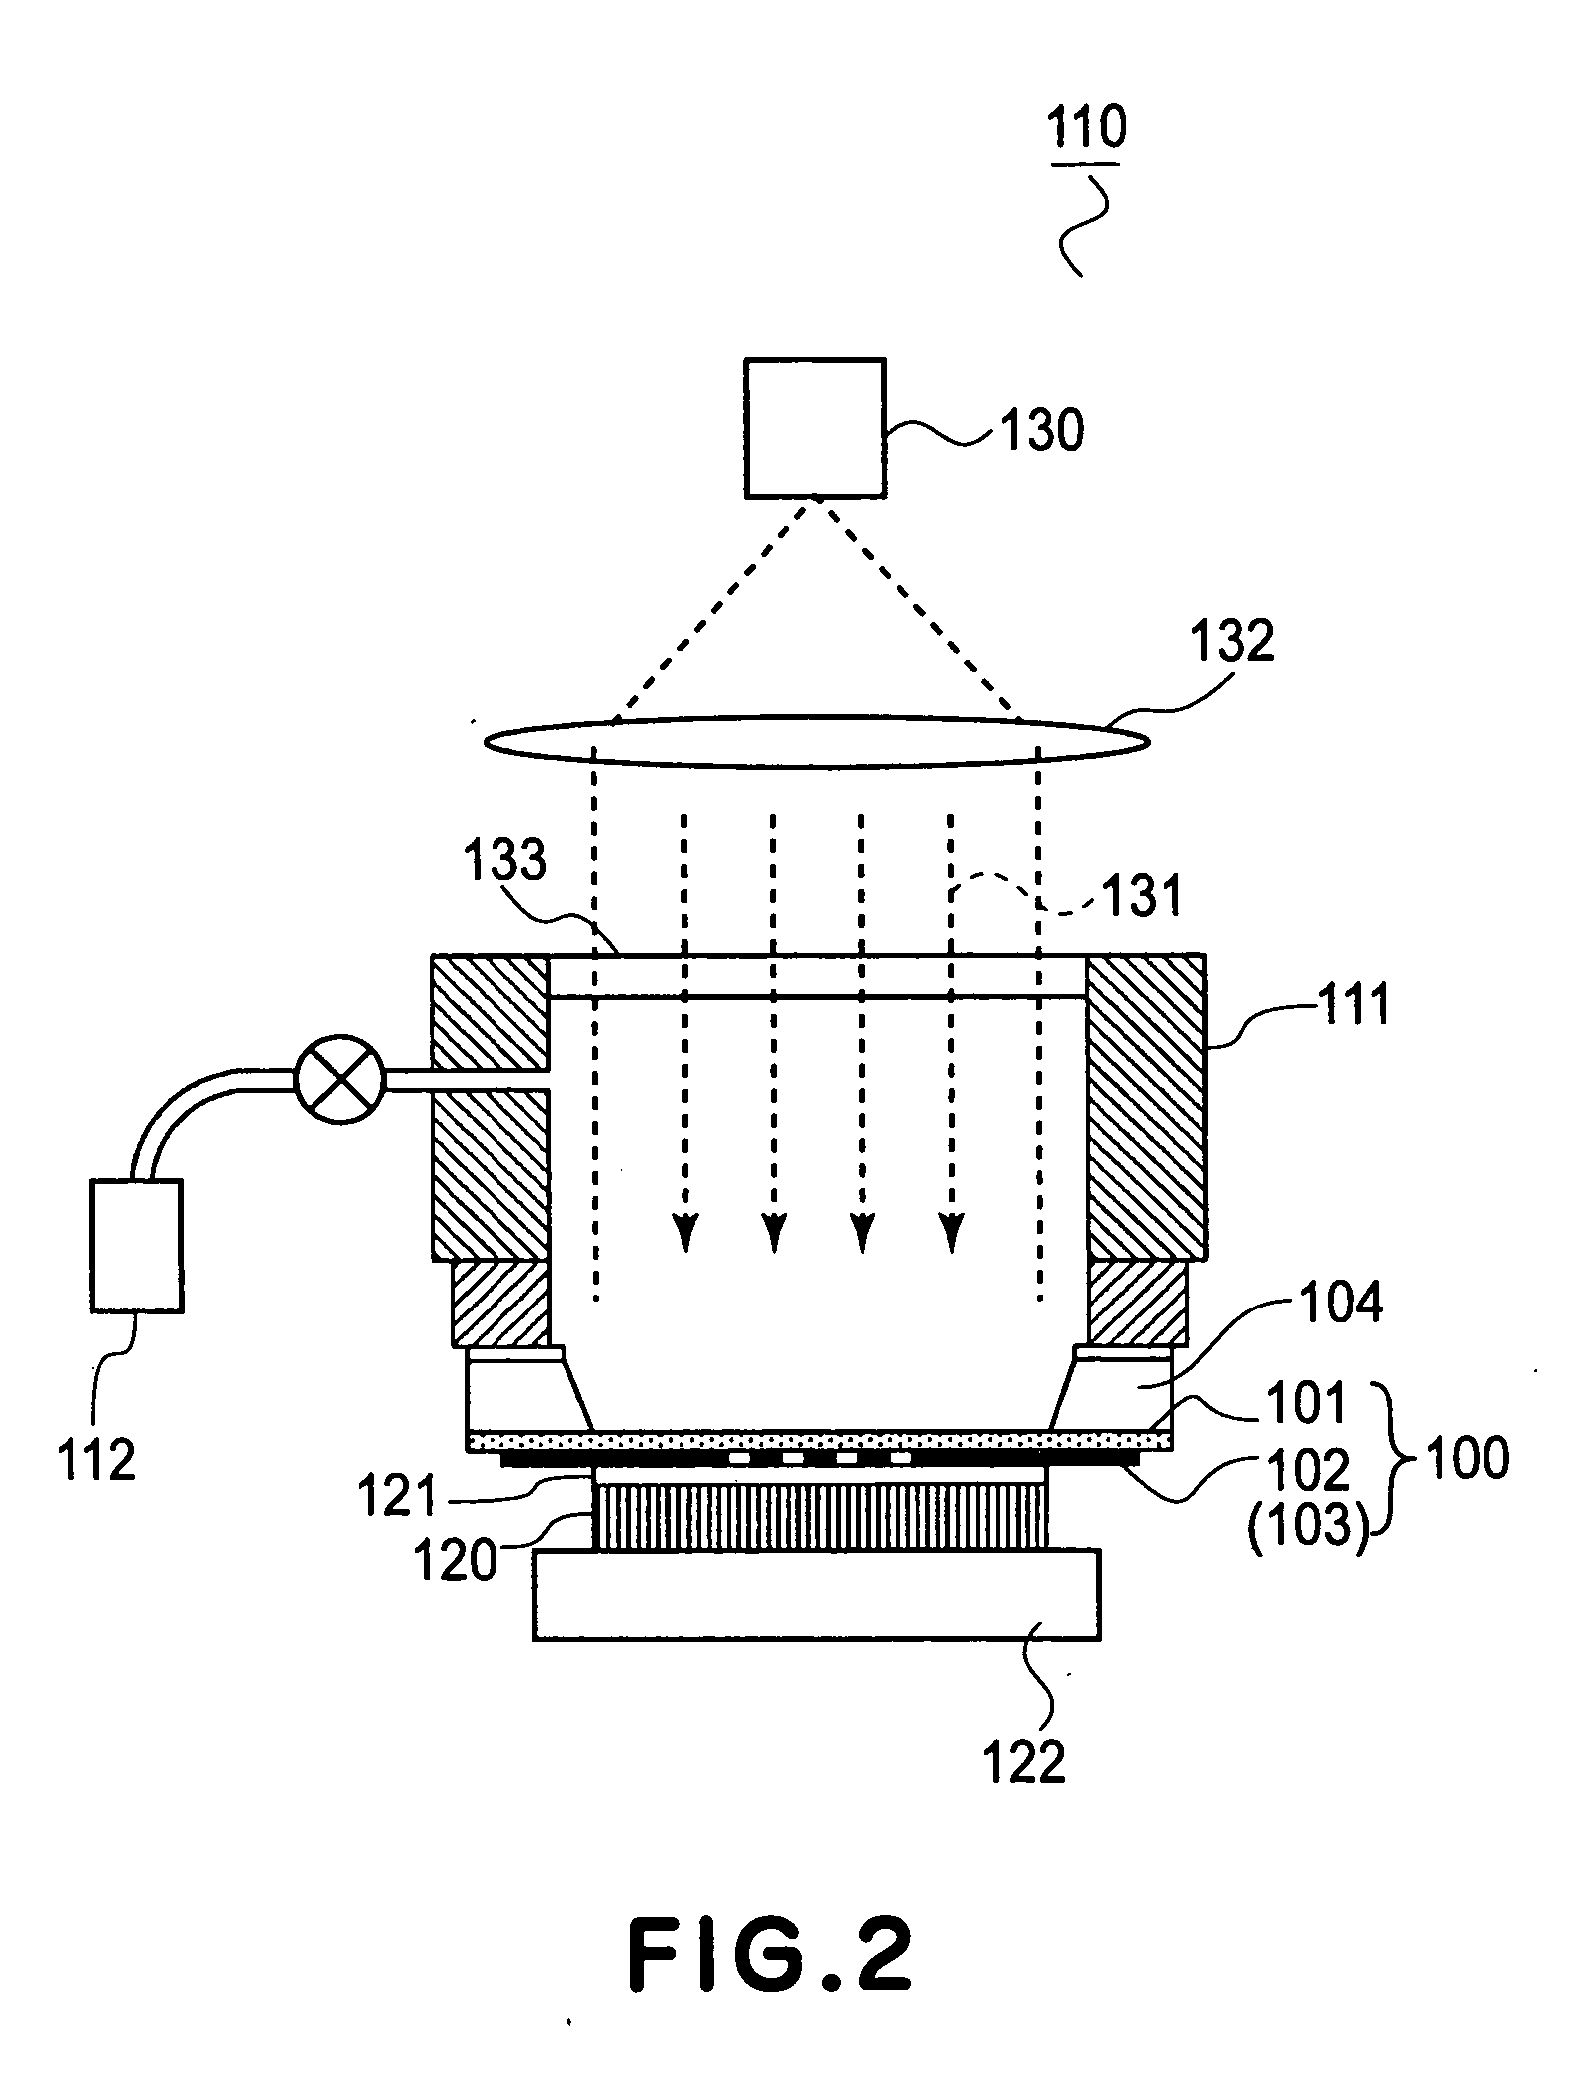 Photomask and near-field exposure method